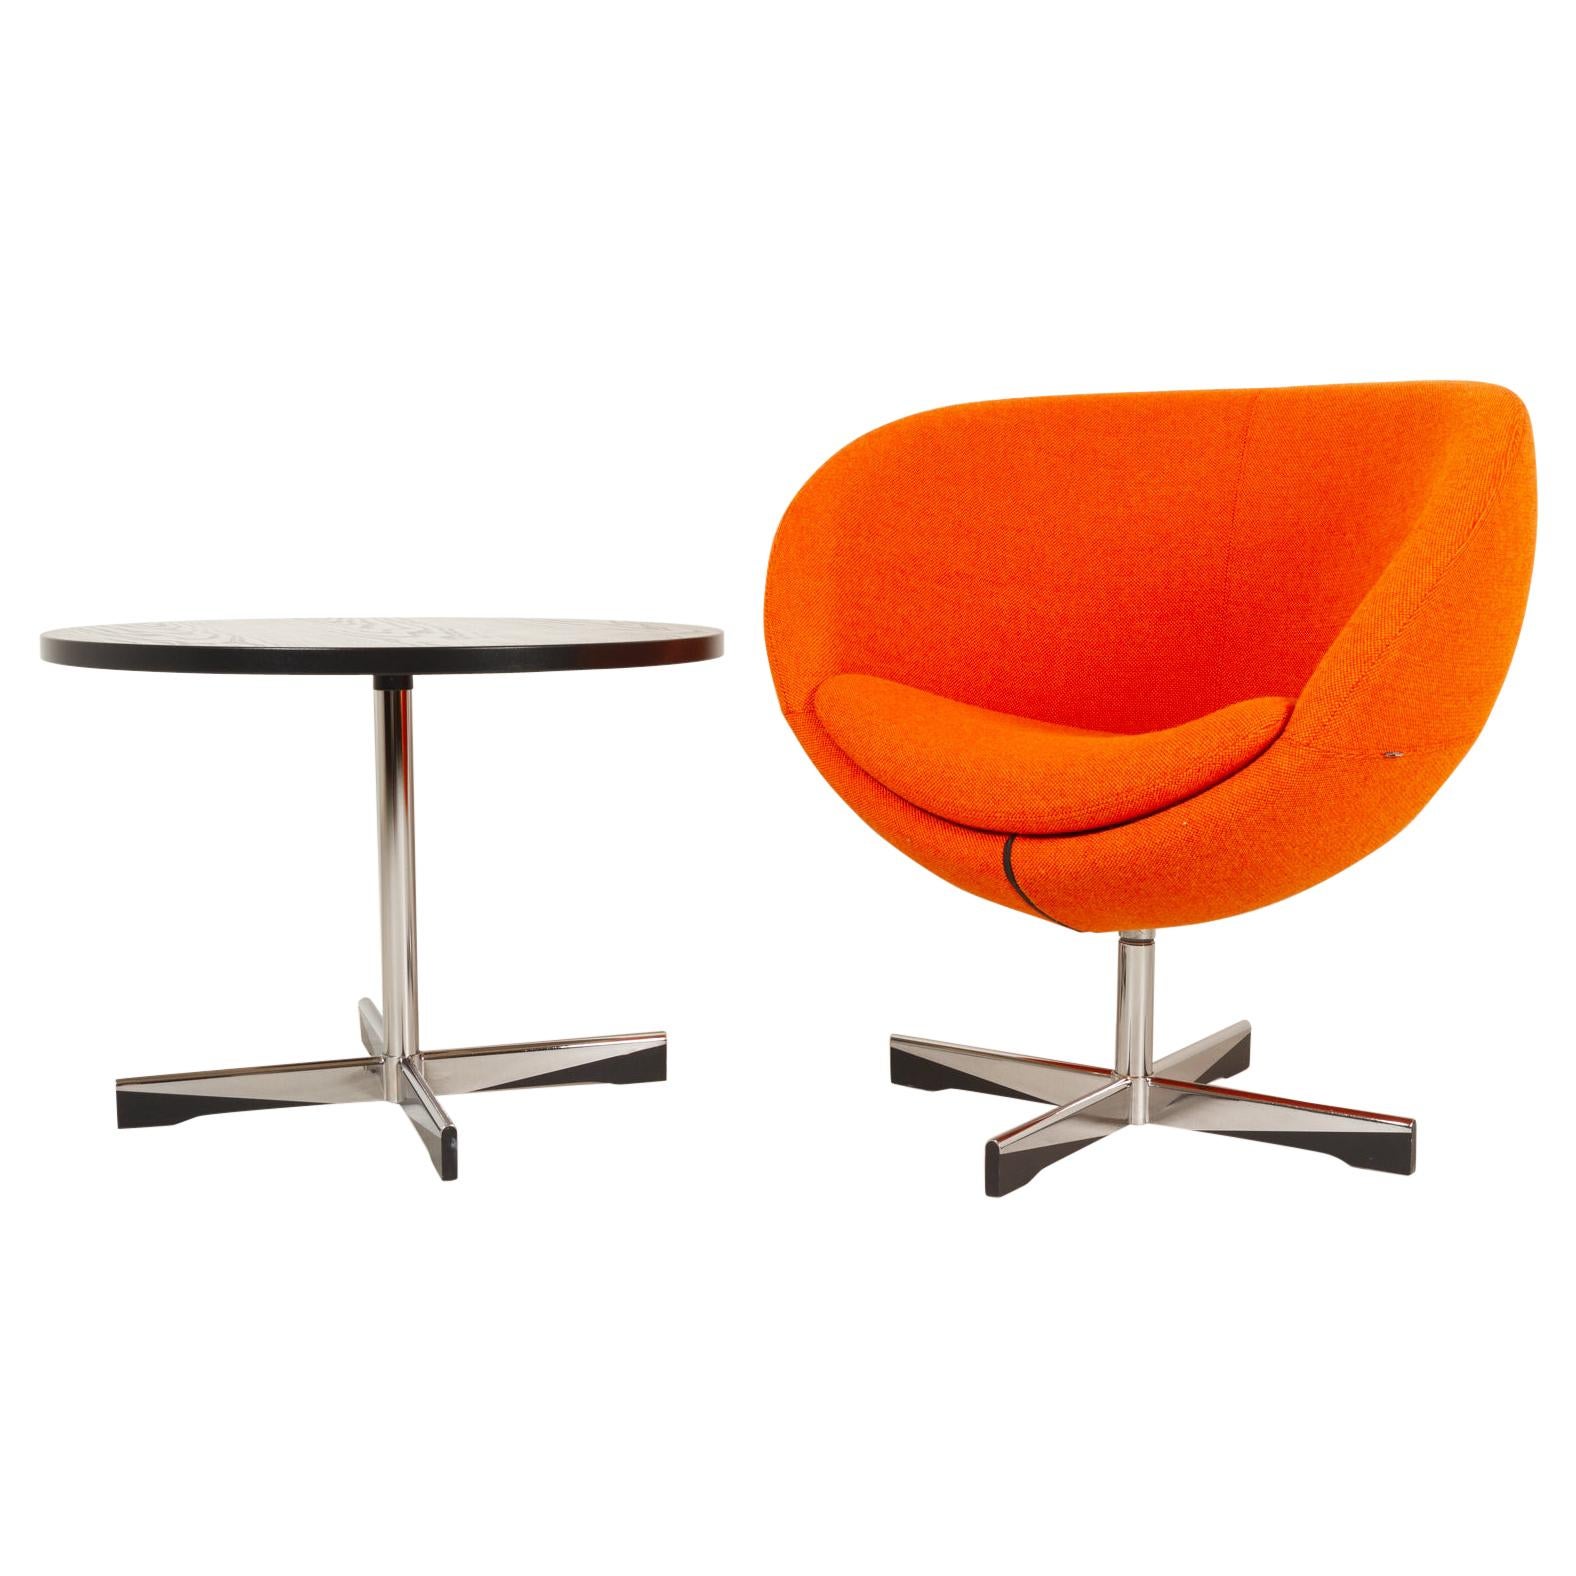 Scandinavian Modern Lounge Chair and Table by Sven Ivar Dysthe, 21st Century